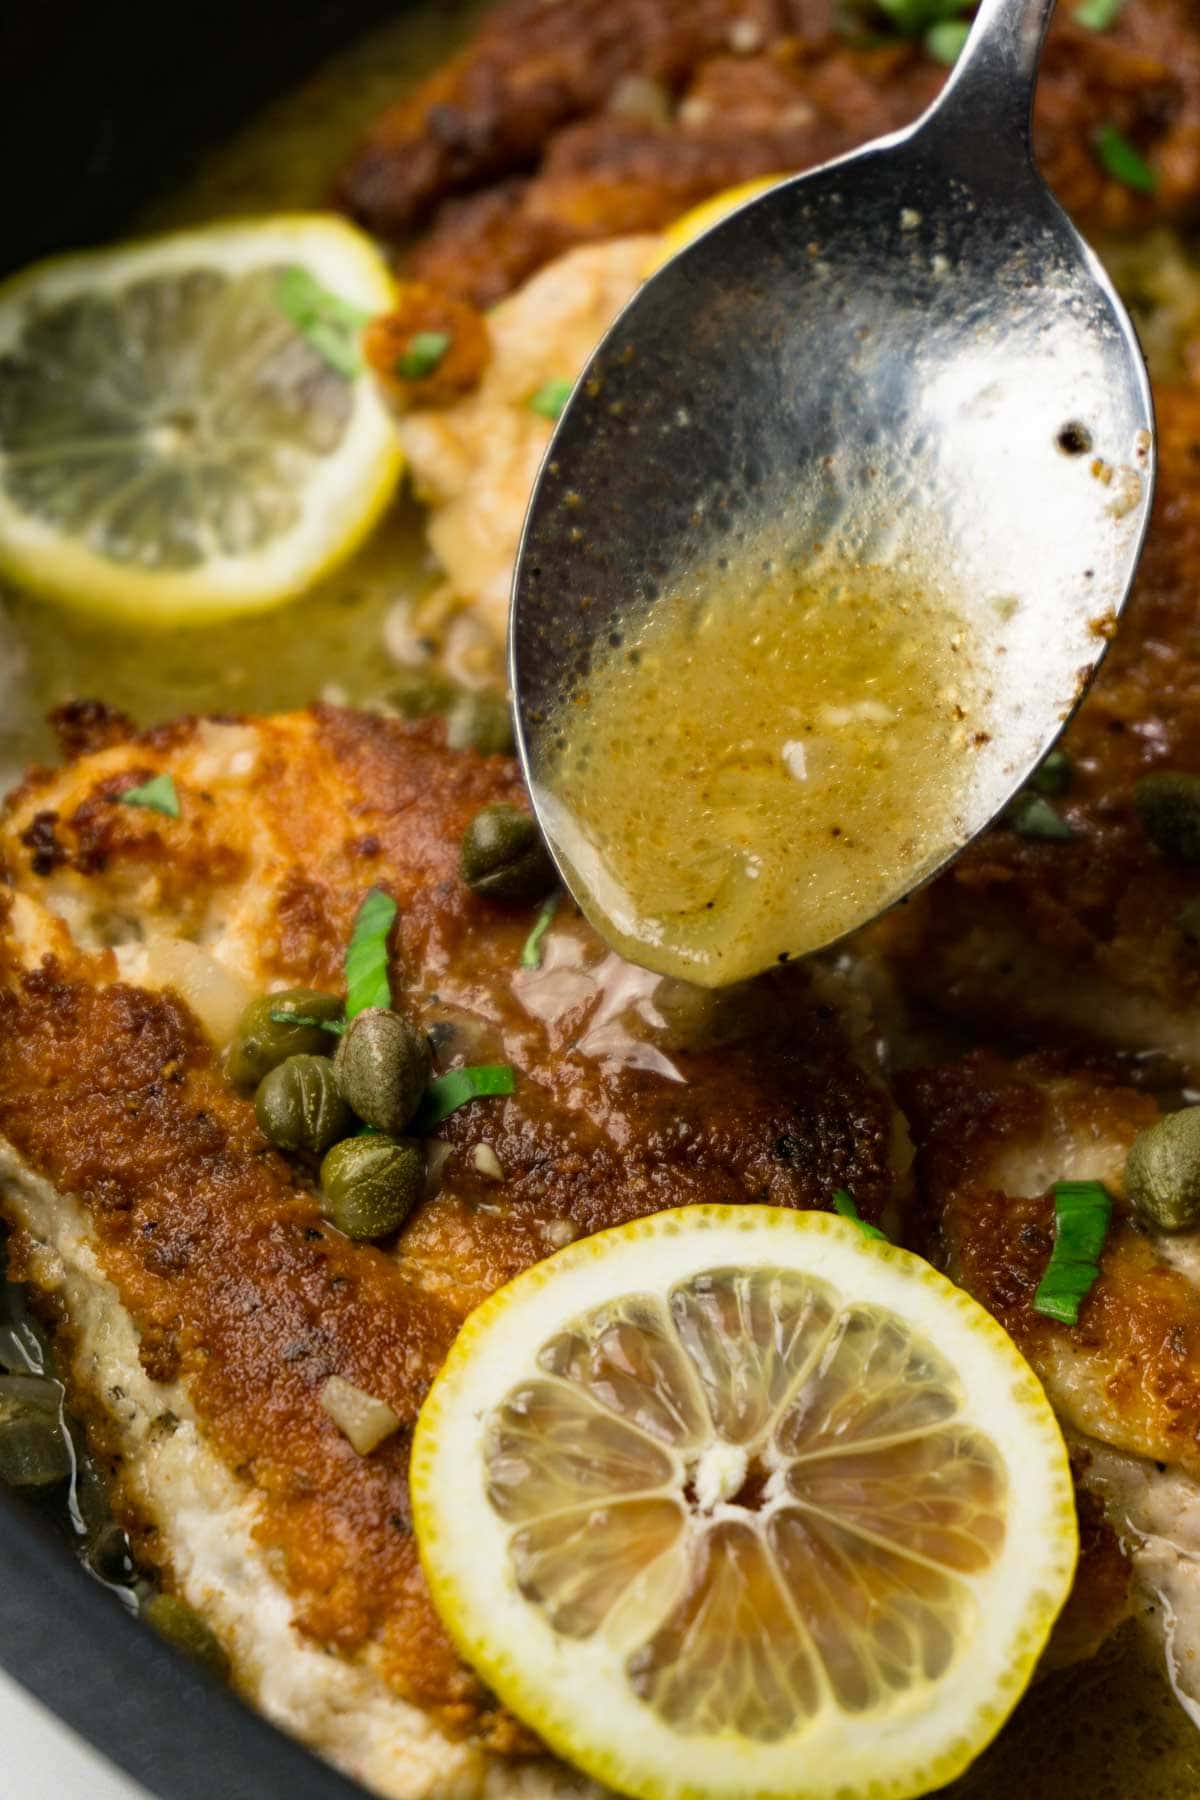 Chicken piccata on a skillet garnished with fresh lemon slices and cappers, a spoon pouring the piccata sauce on the chicken.